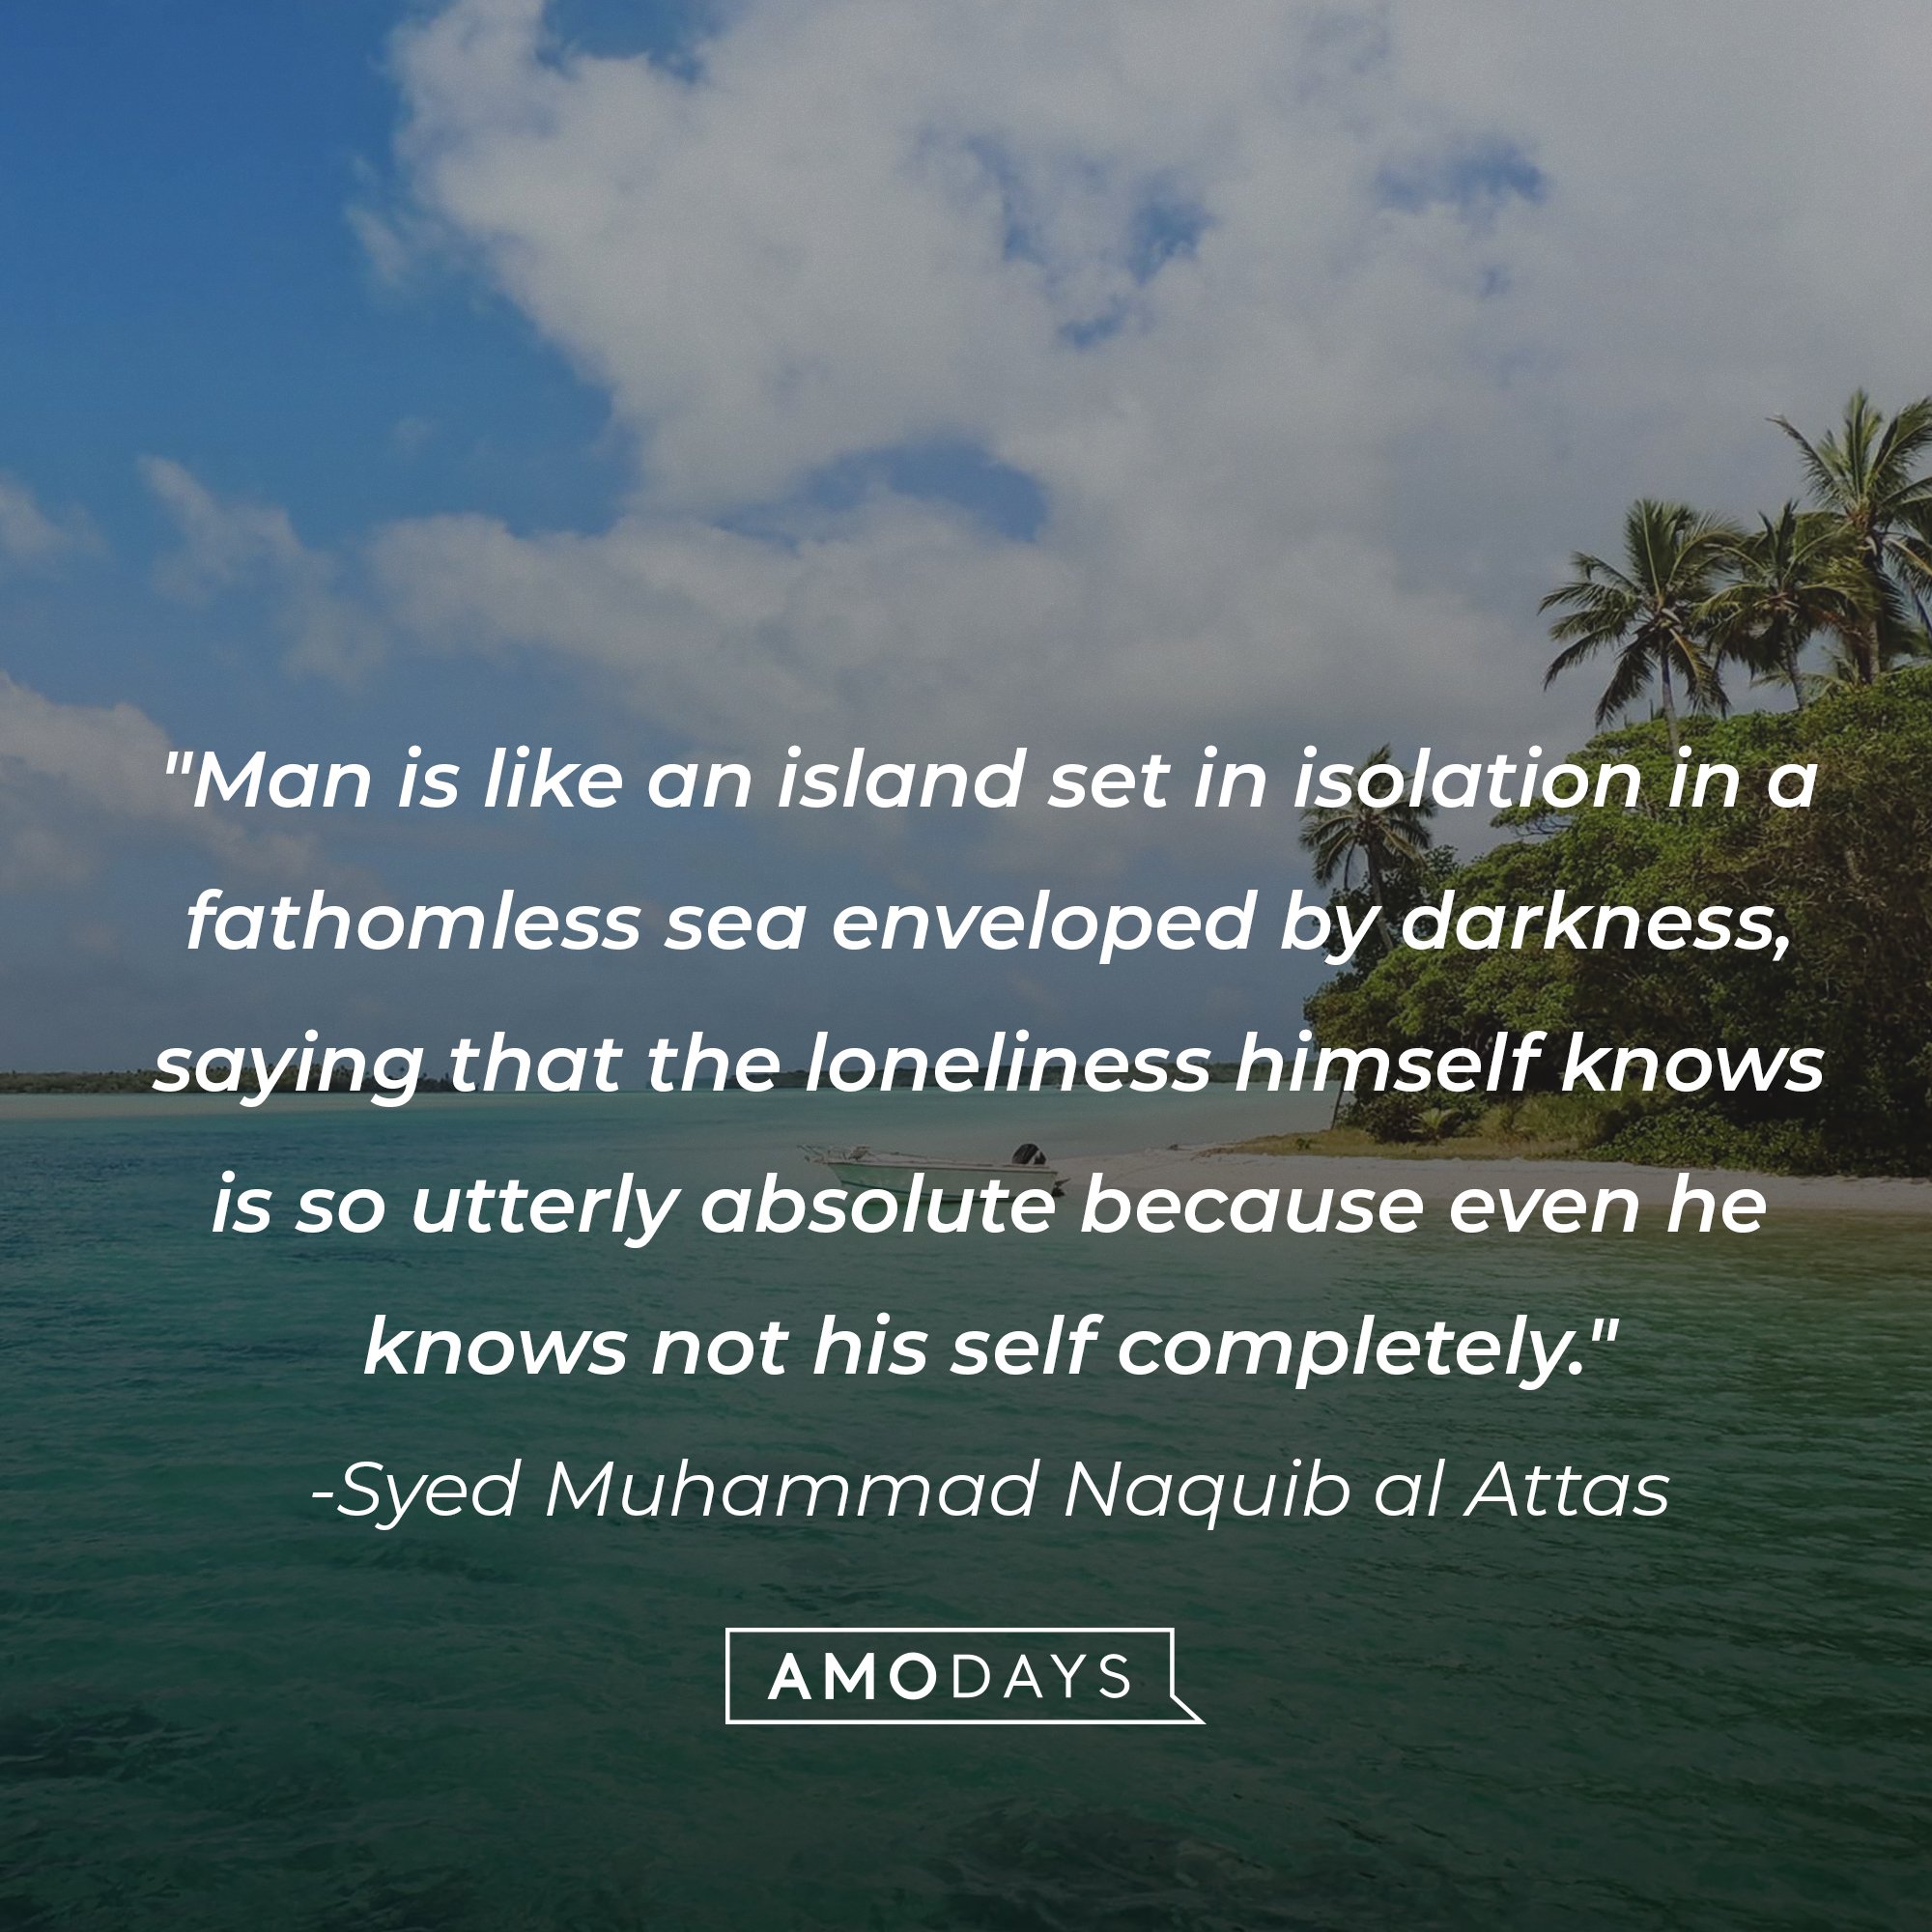 Syed Muhammad Naquib al Attas' quote: "Man is like an island set in isolation in a fathomless sea enveloped by darkness, saying that the loneliness himself knows is so utterly absolute because even he knows not his self completely." | Image: AmoDays